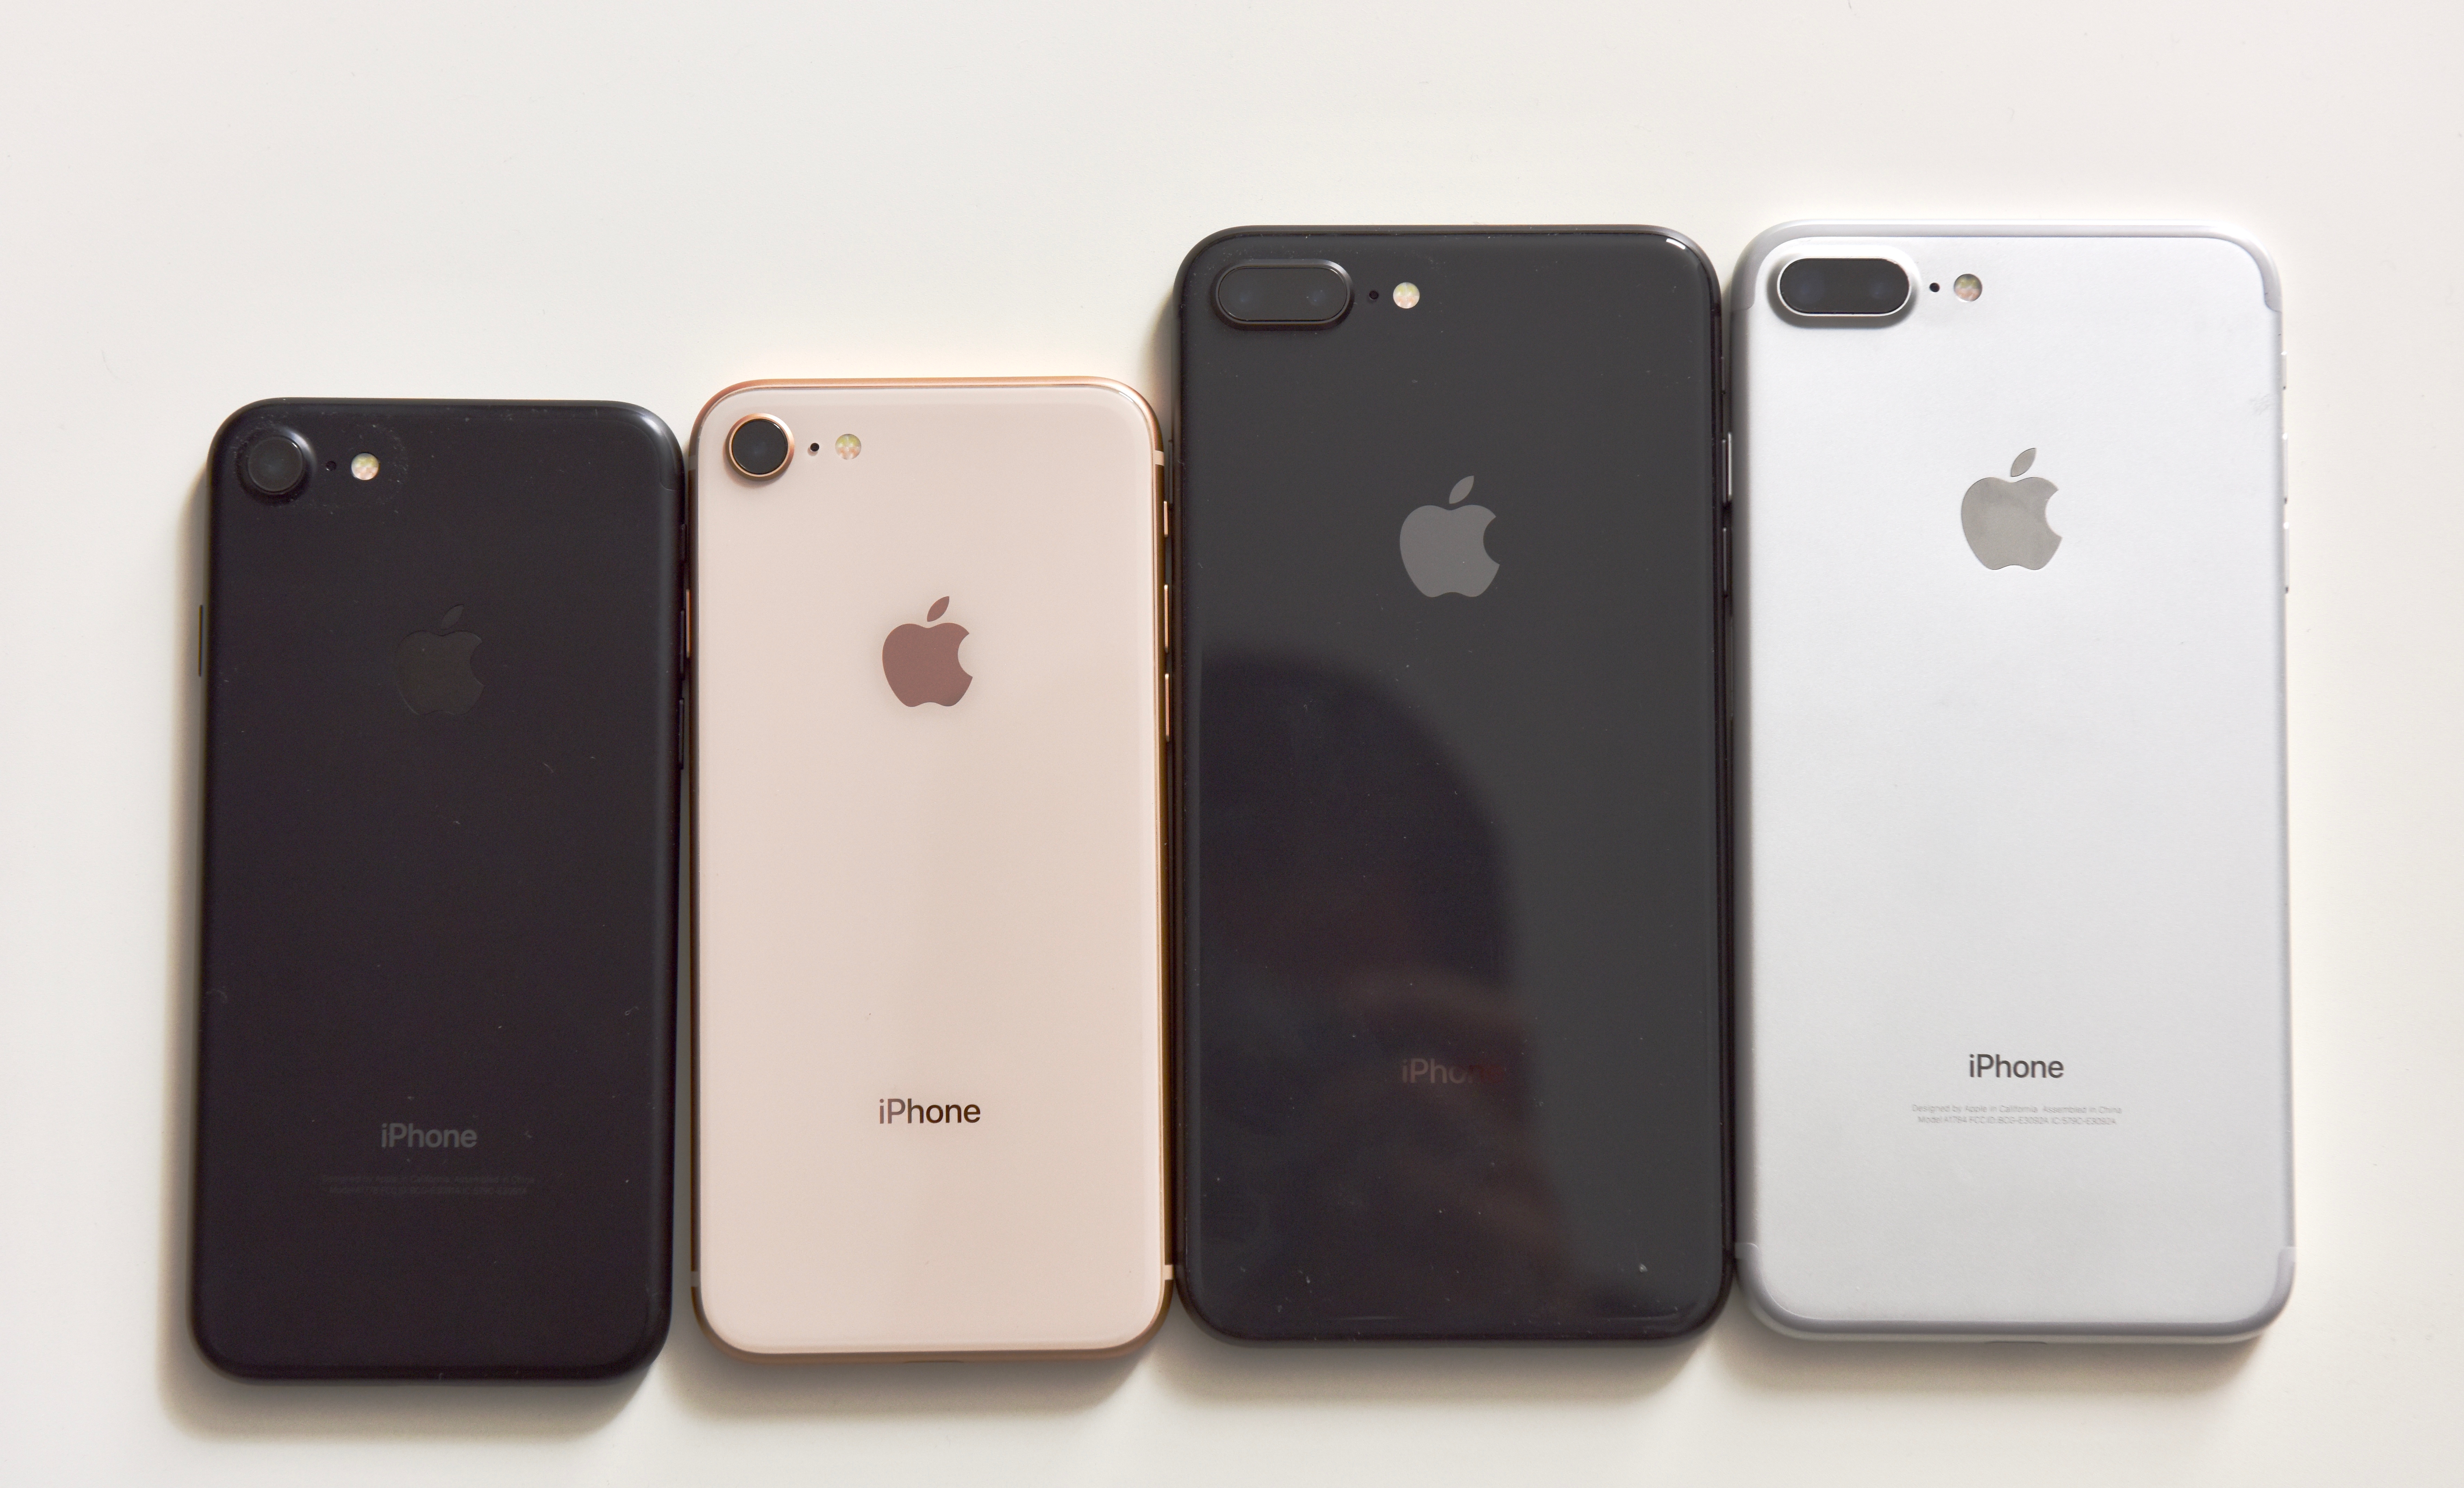 Where to find the best iPhone trade-in deals for your old iPhone so you can save on the iPhone X.